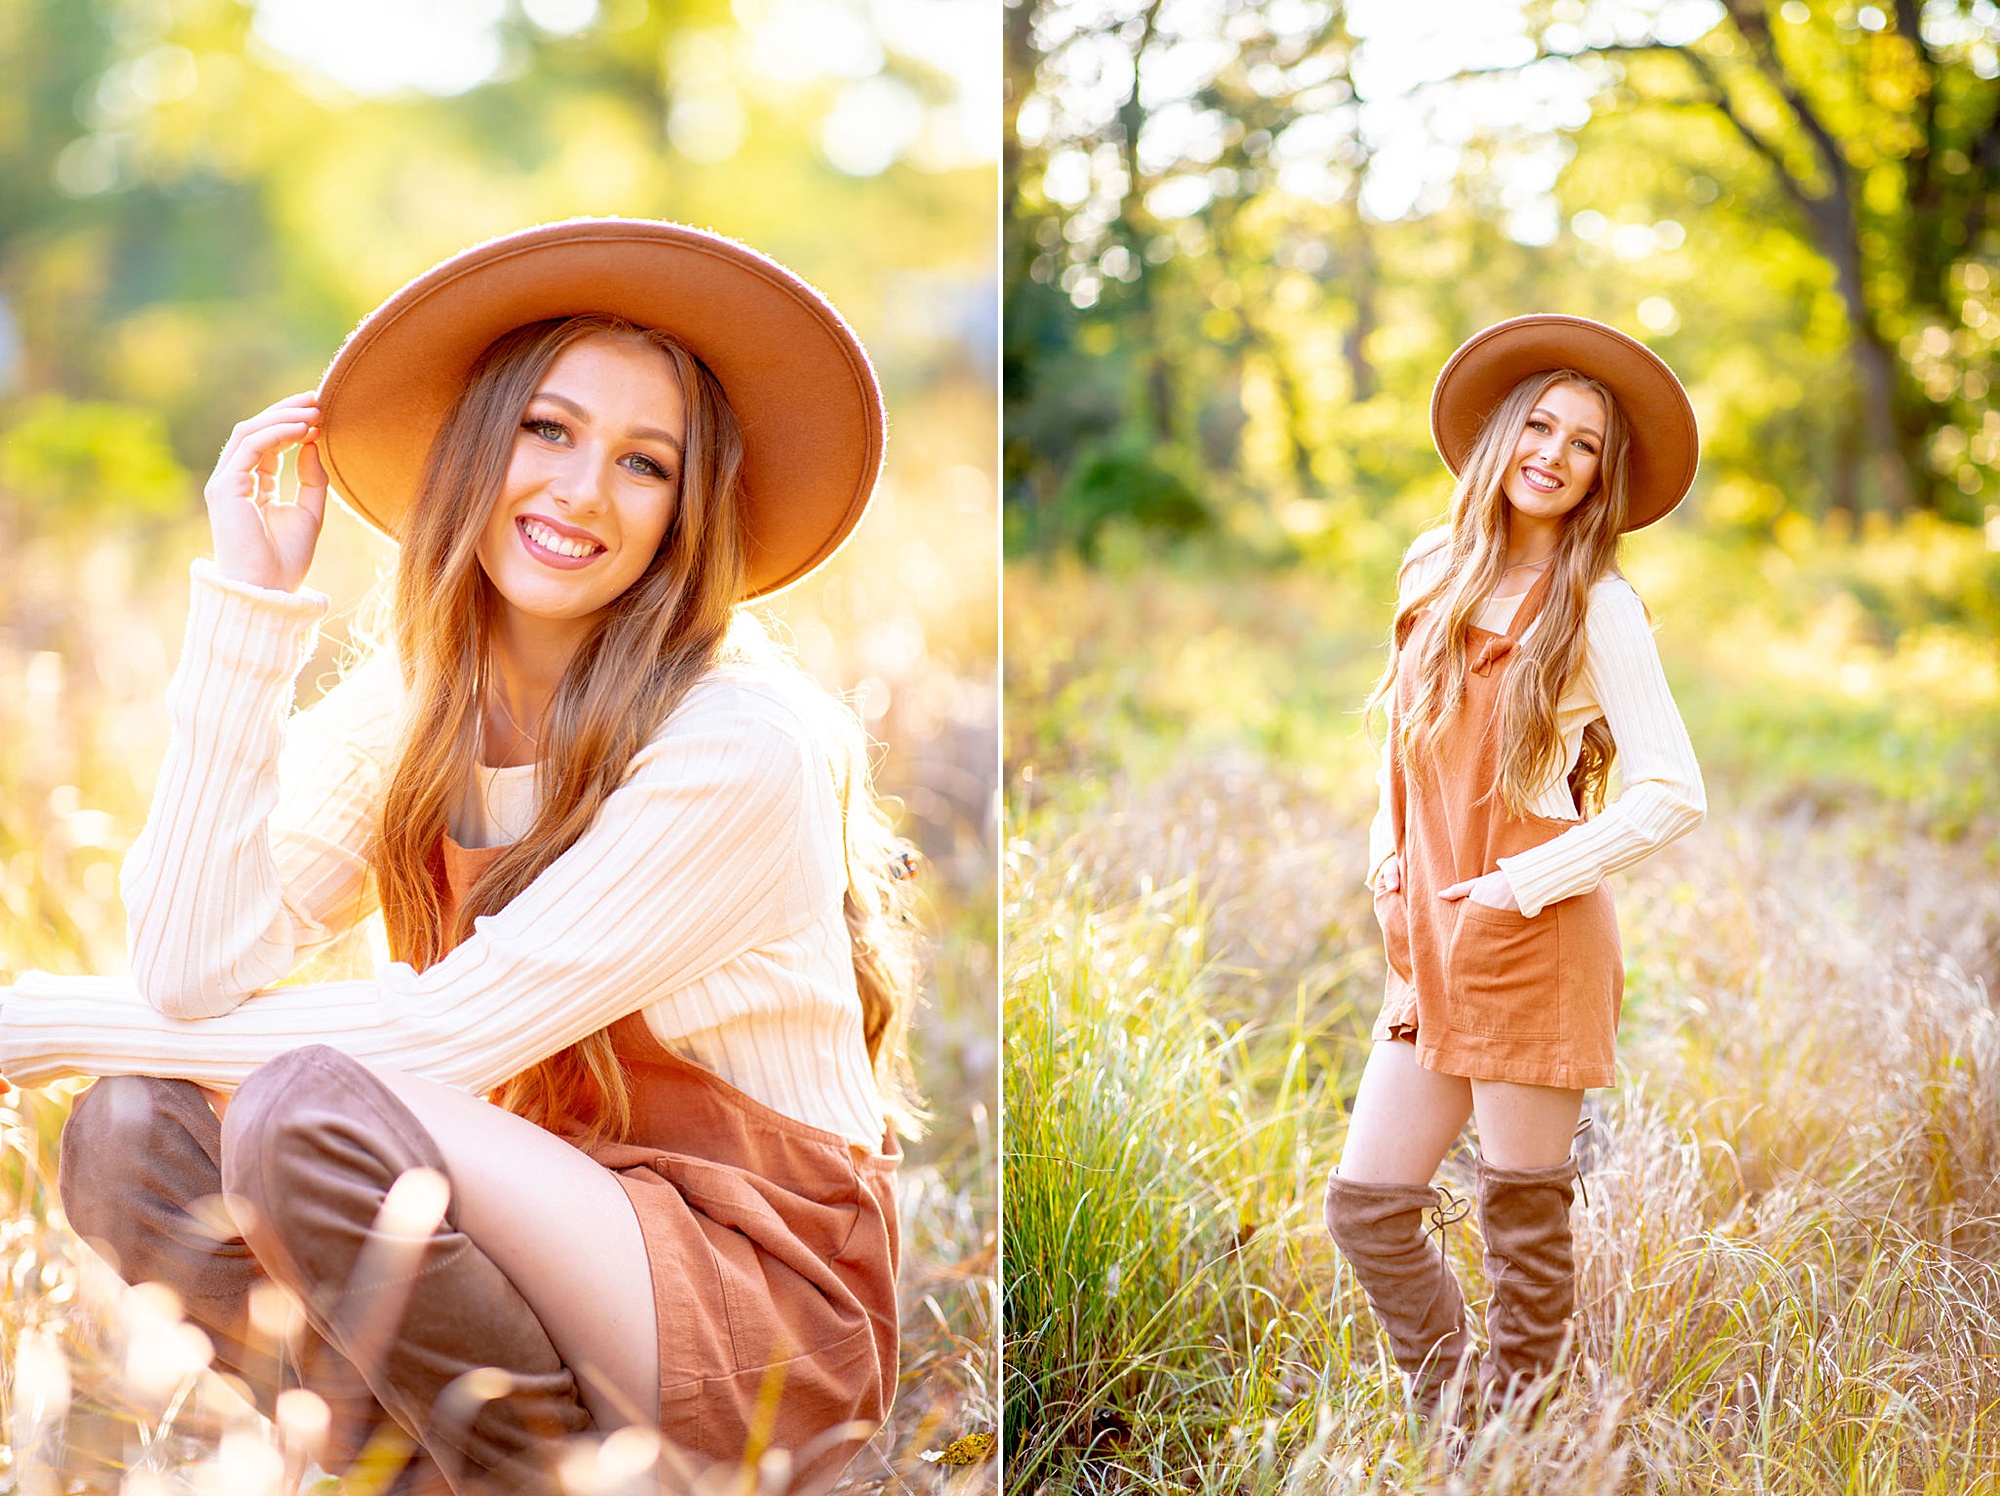 styled senior portrait sessions provided by luxury portrait photographer 